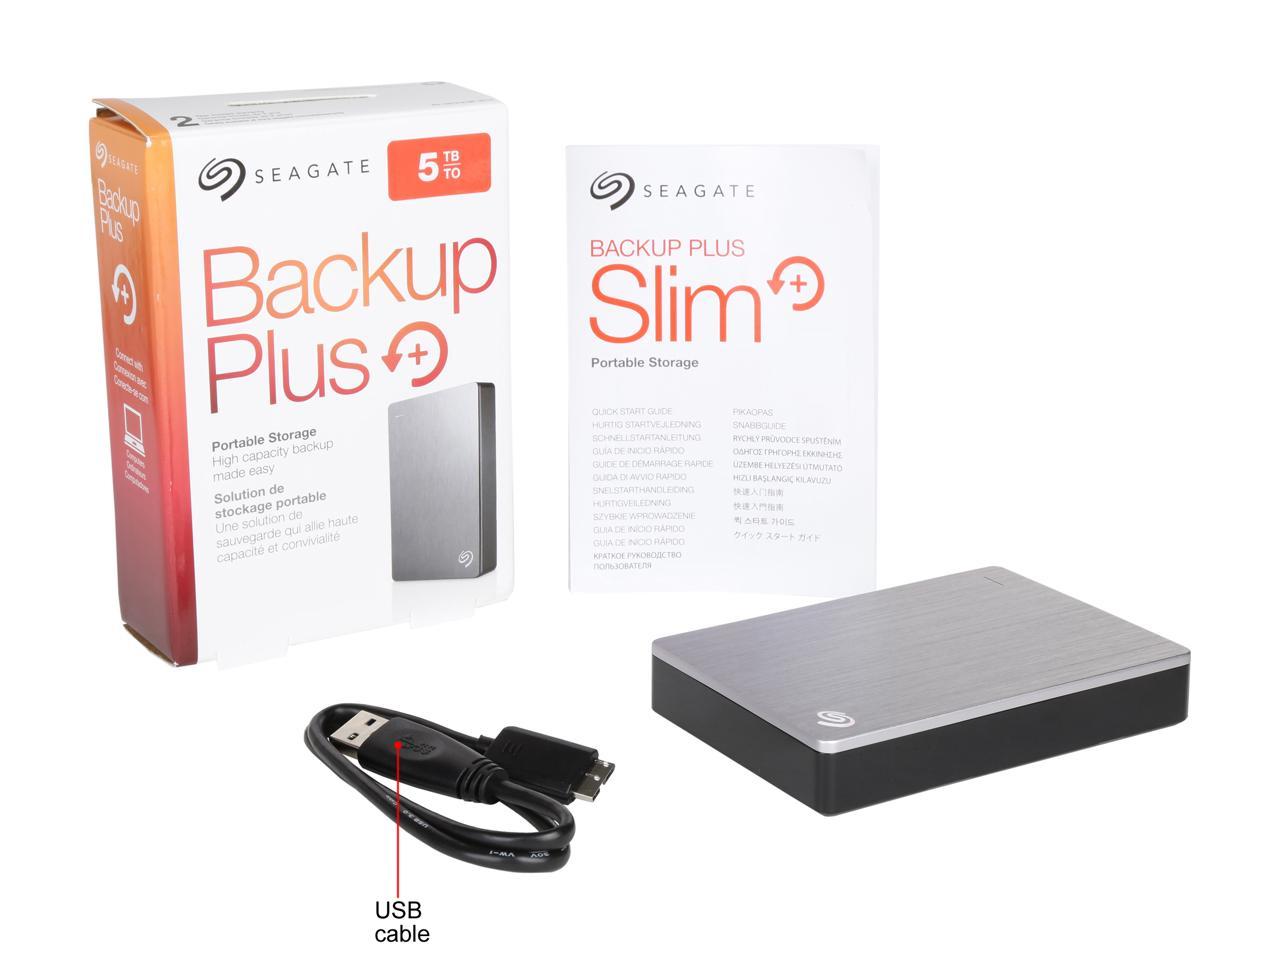 how to use seagate backup plus without registering